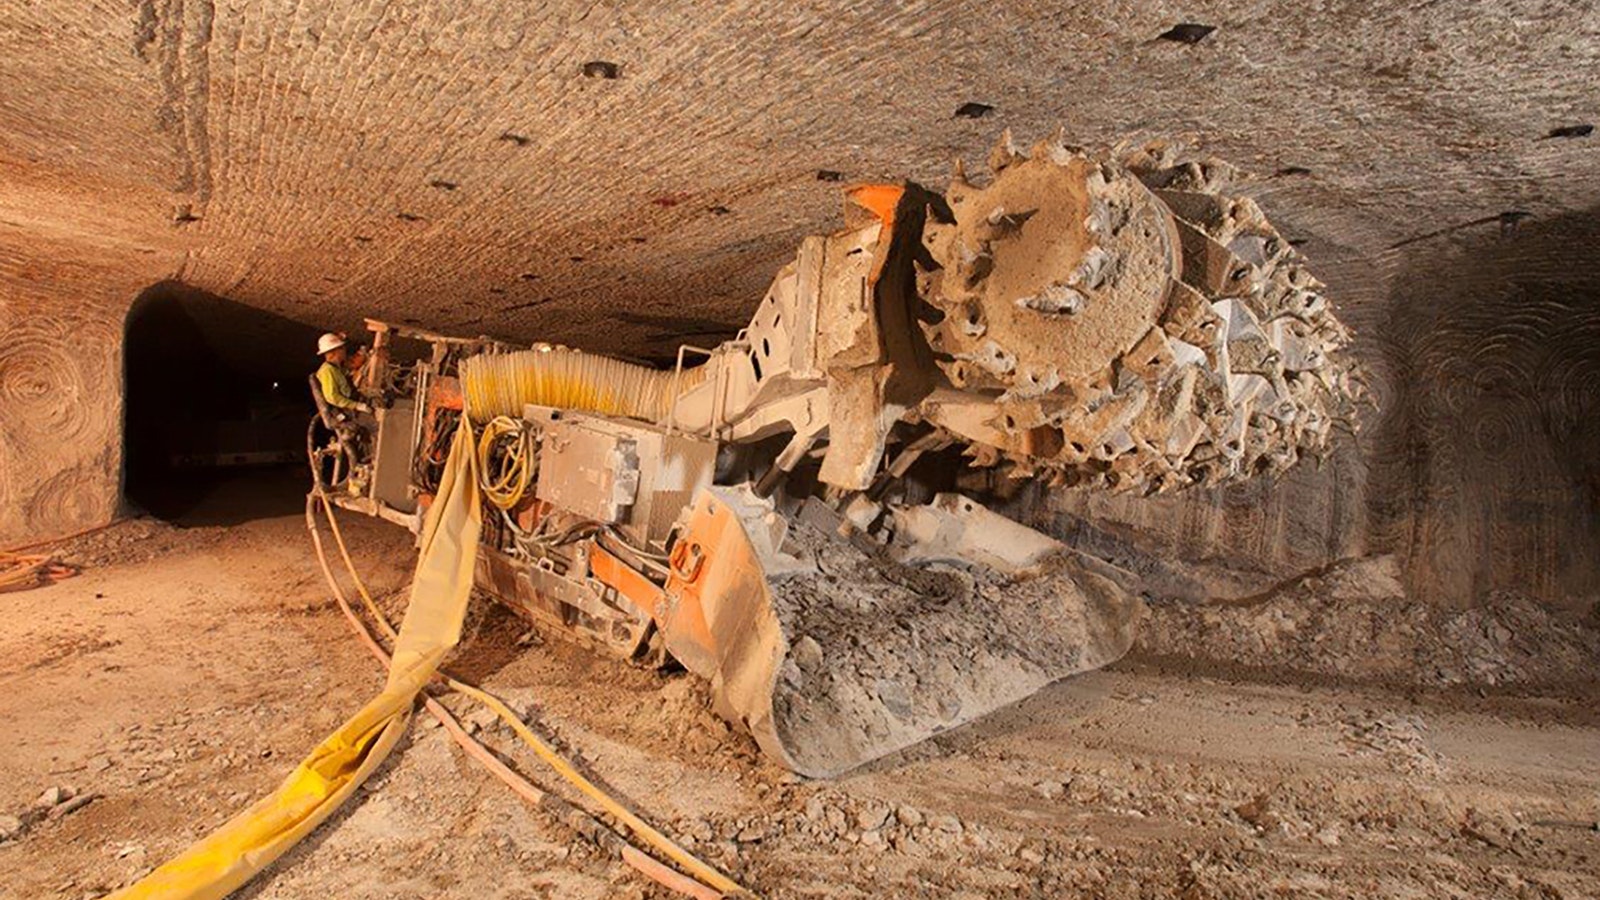 Trona is mined underground, using heavy equipment like this continuous miner. The ore is then carried to the surface and processed.